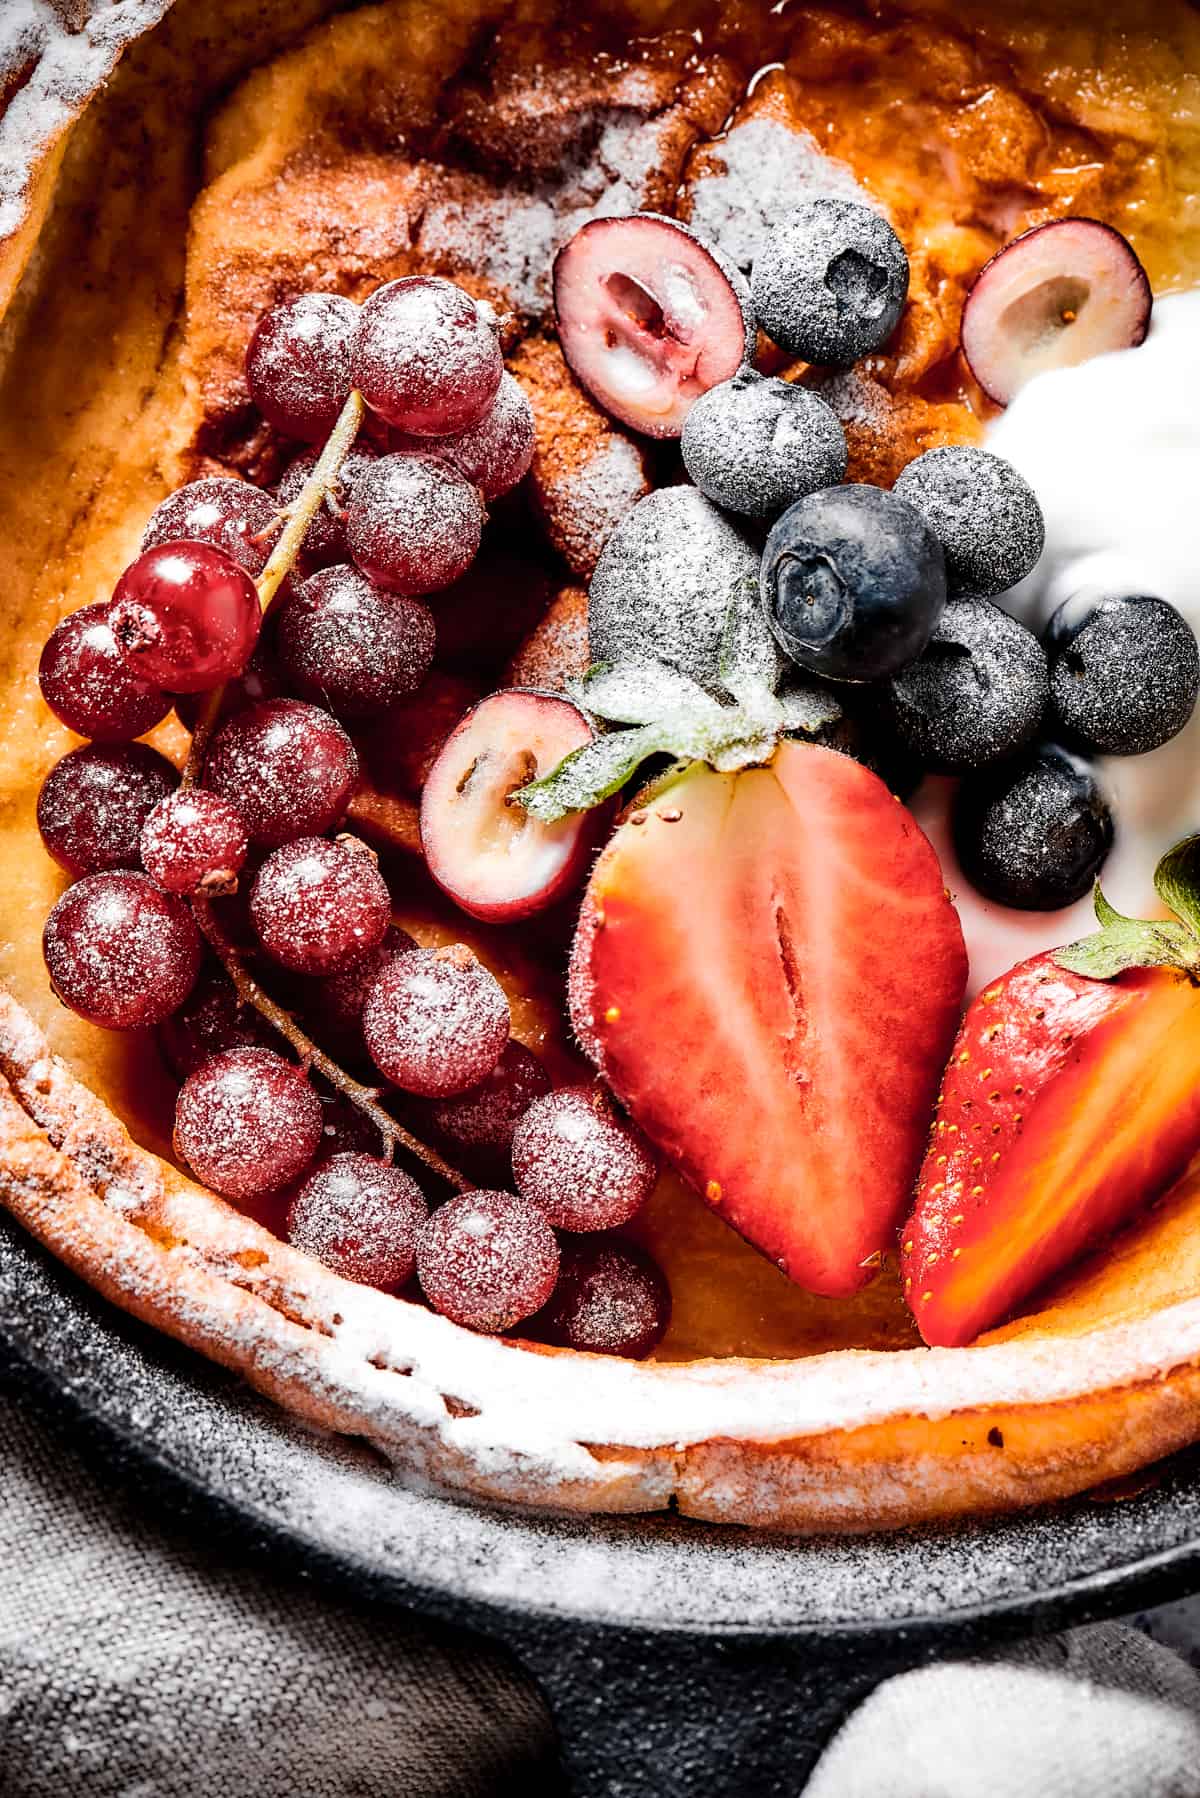 A German pancake topped with powdered sugar and fresh fruit.